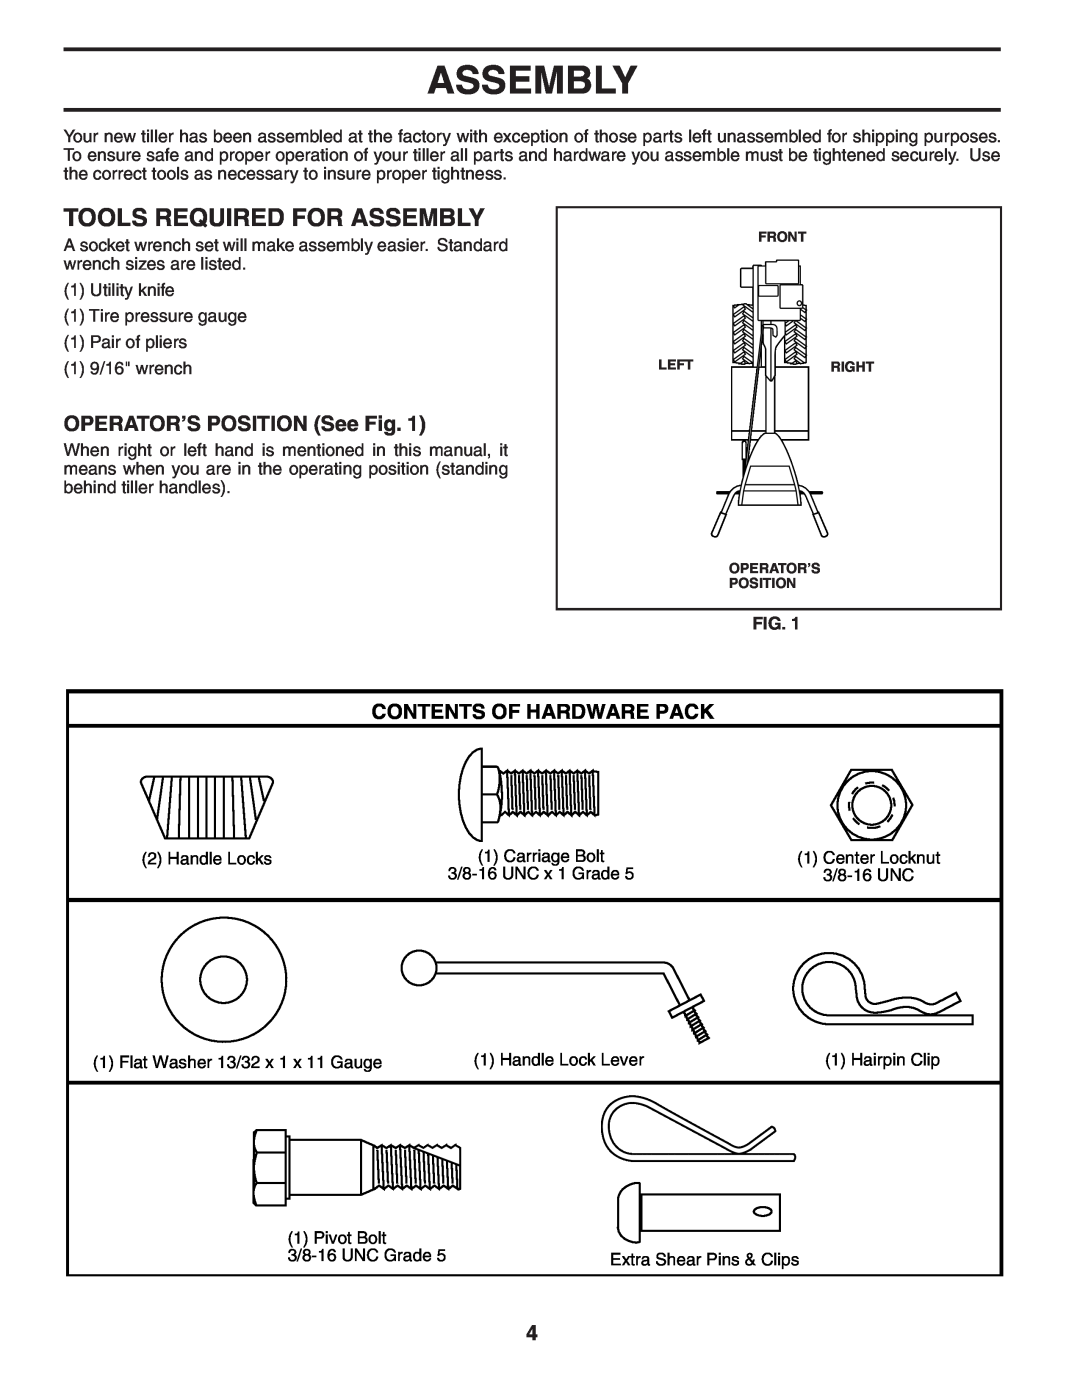 Poulan 401434 manual Tools Required For Assembly, OPERATOR’S POSITION See Fig, Contents Of Hardware Pack 